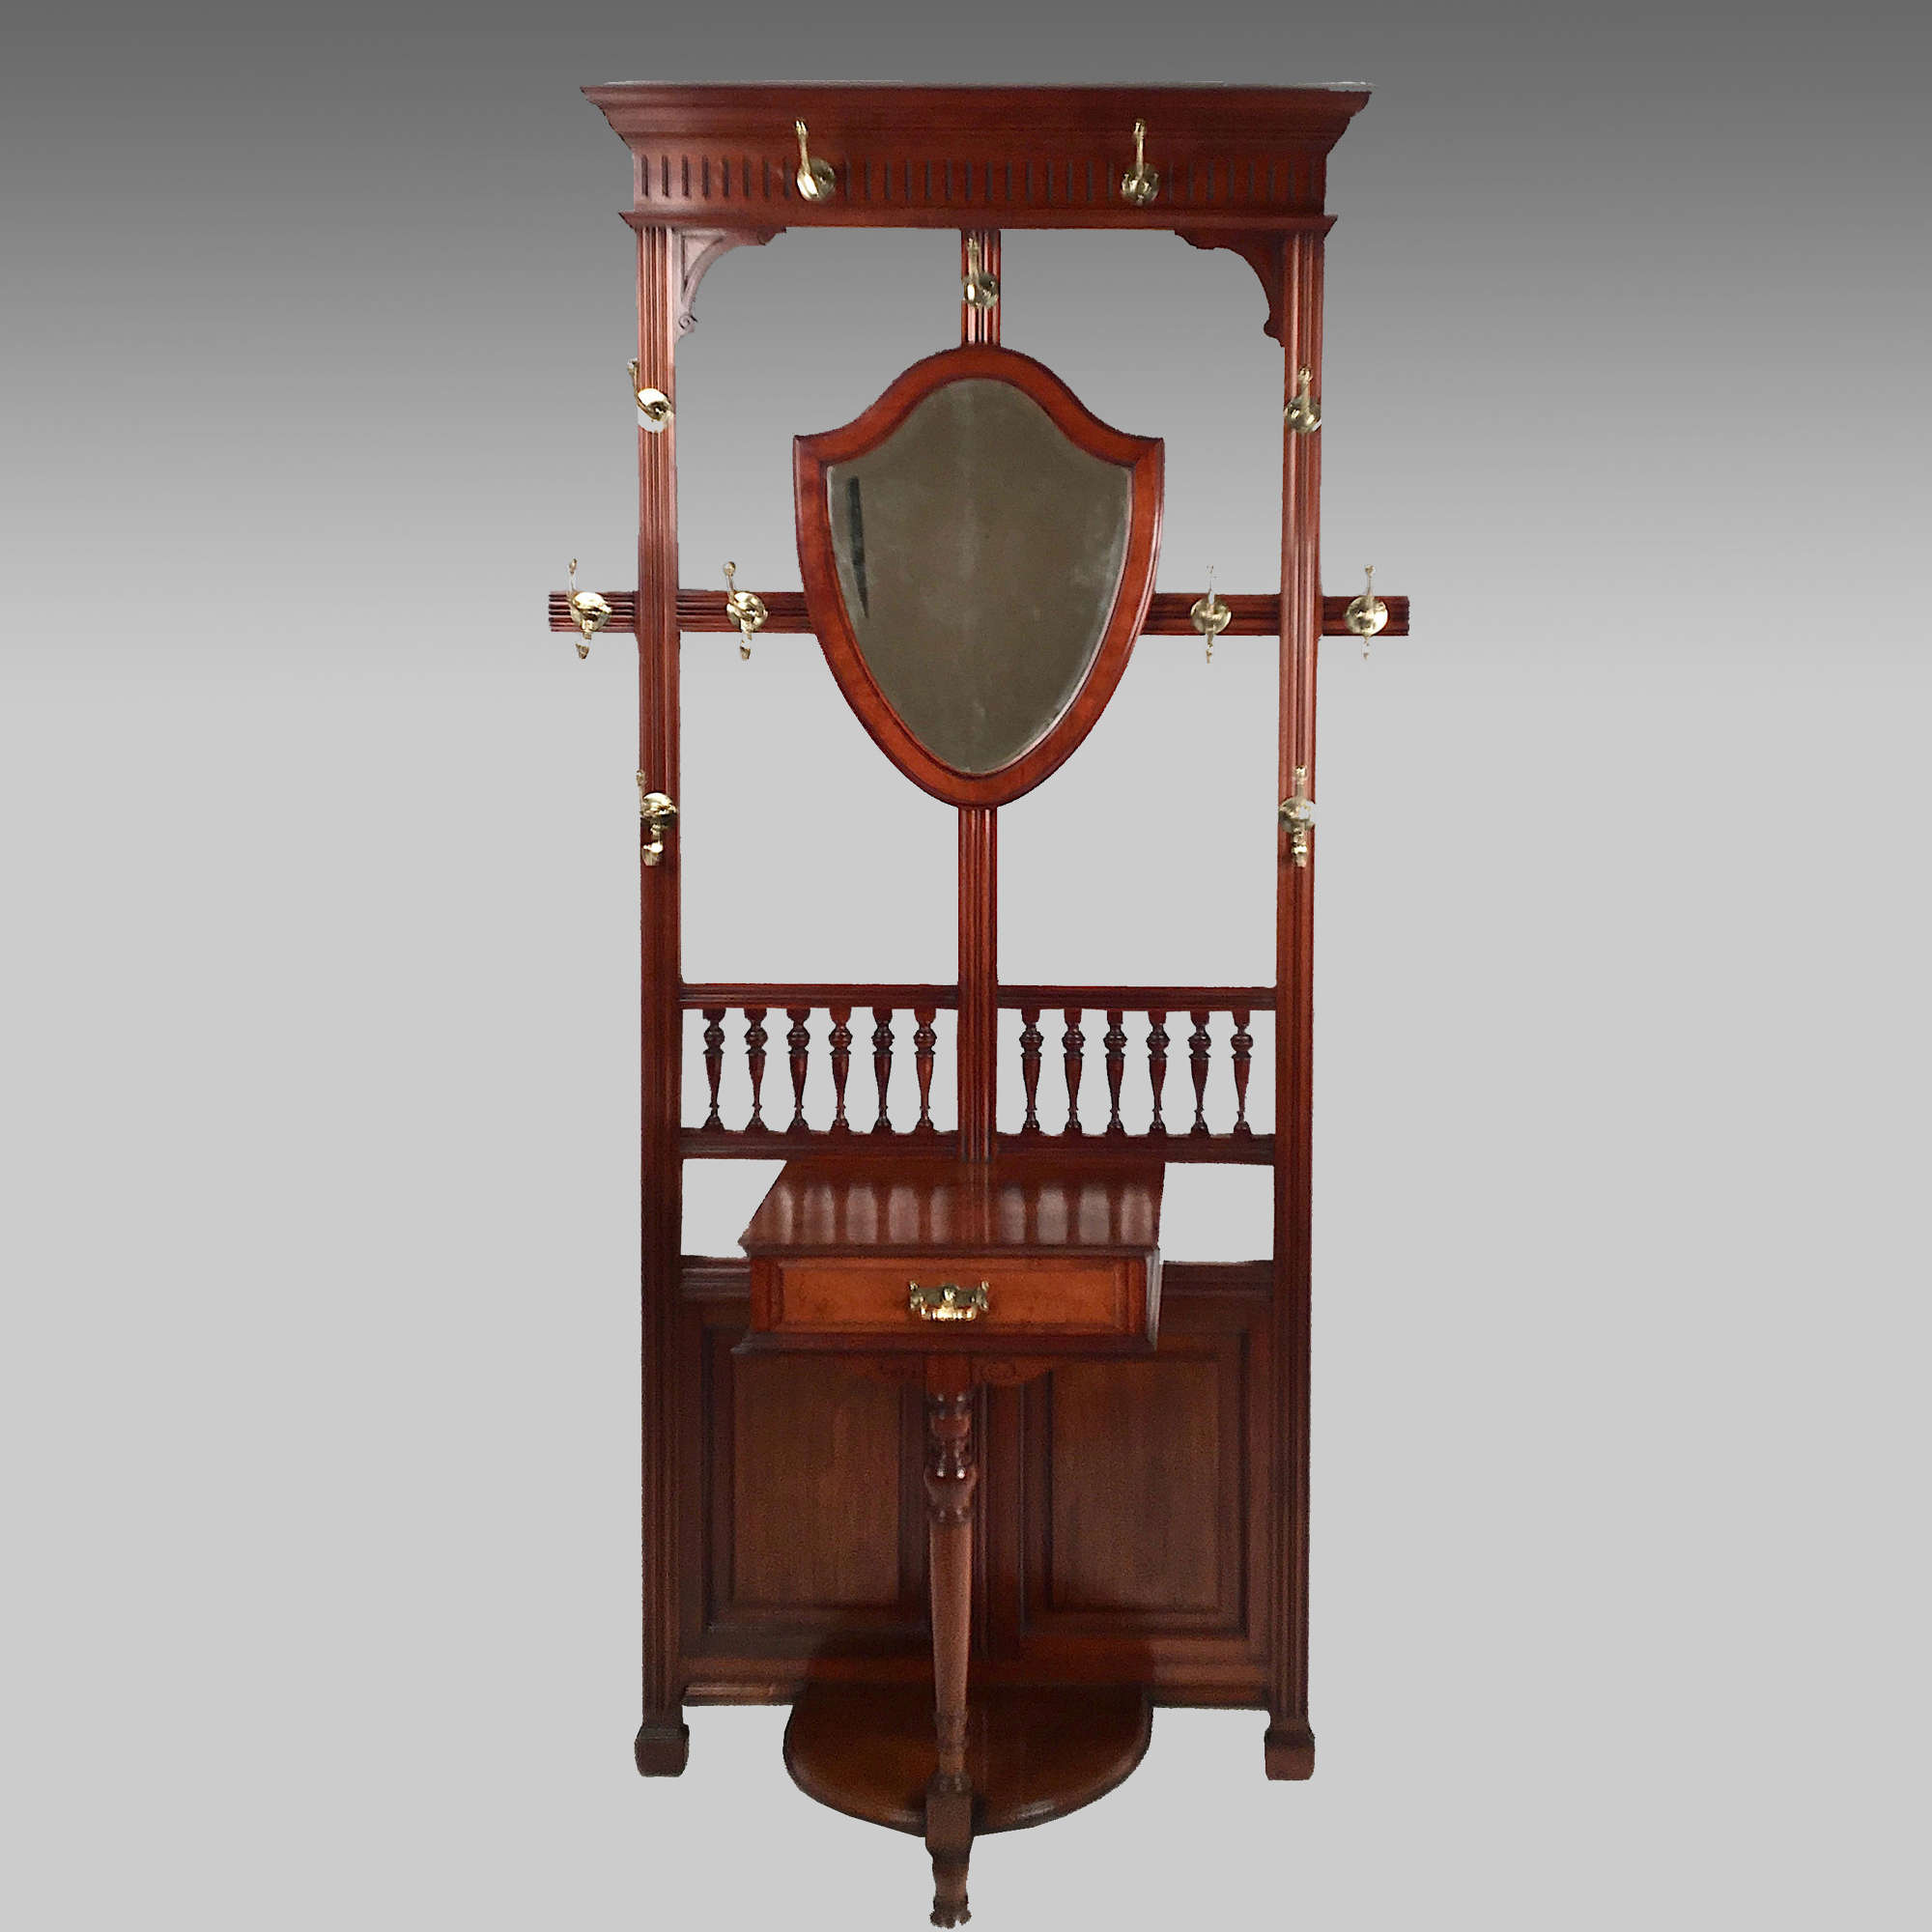 19th century walnut hall stand in the aesthetic movement style